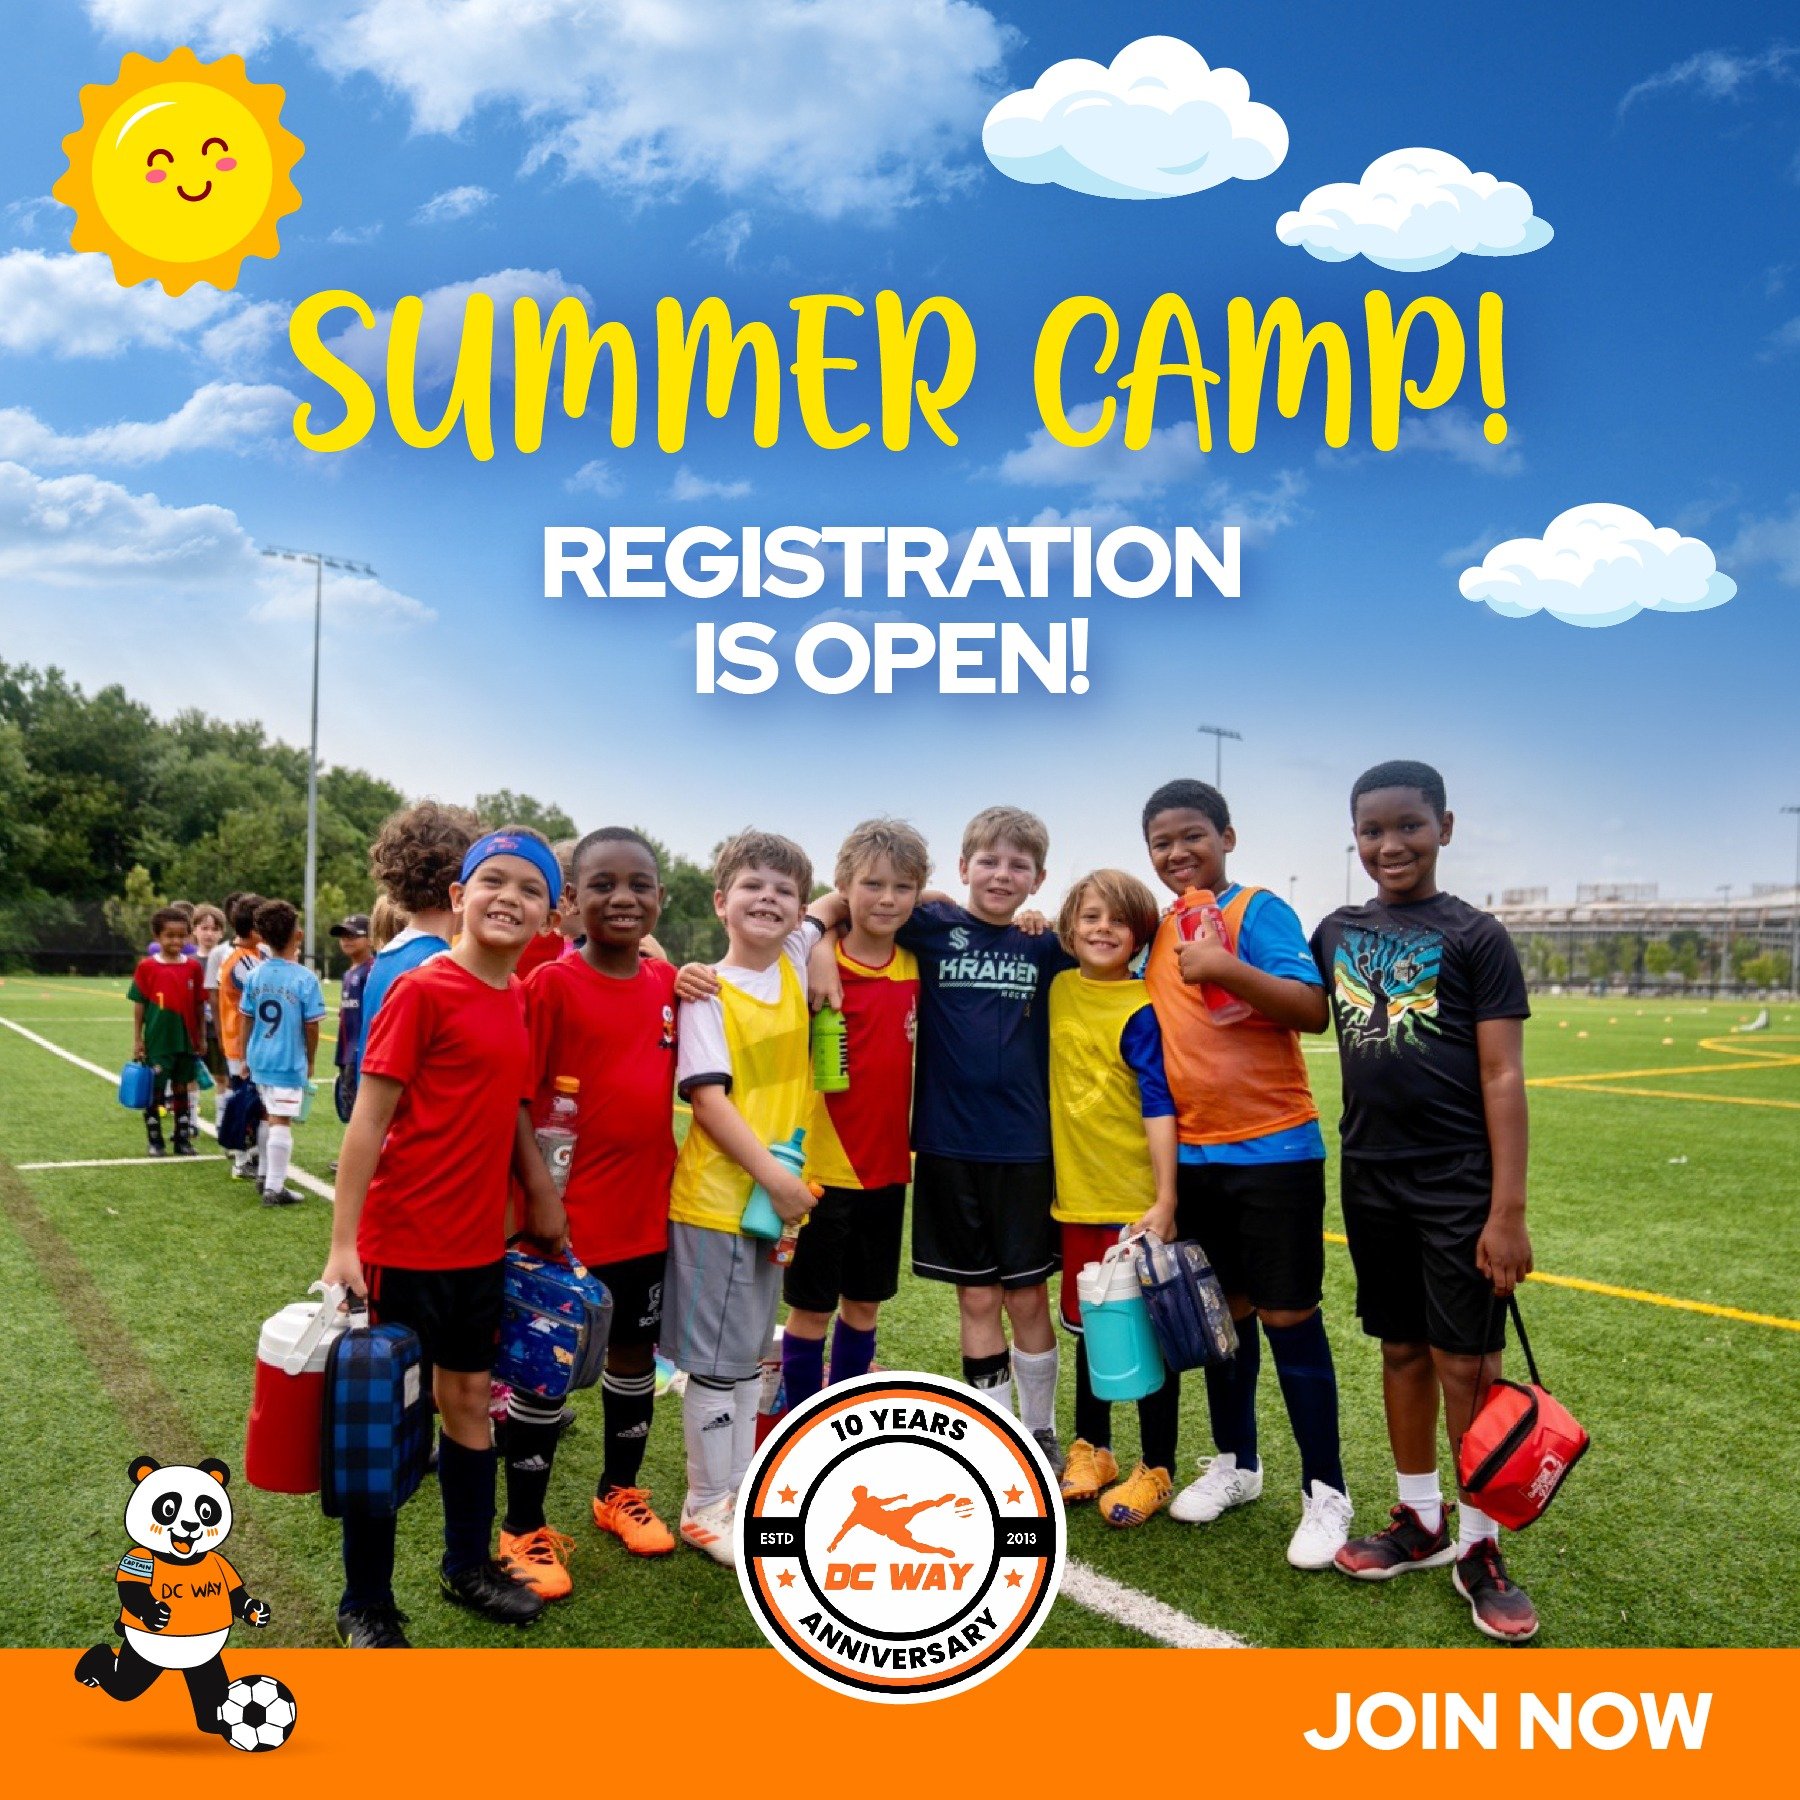 Happy Monday! Are you ready to kick off an unforgettable summer for your little soccer star? ⚽️✨Only a month left until our Summer Camp begins!☀️
 
🎉 This year is extra special as we mark our club's 10-year anniversary, and we've planned an unforget